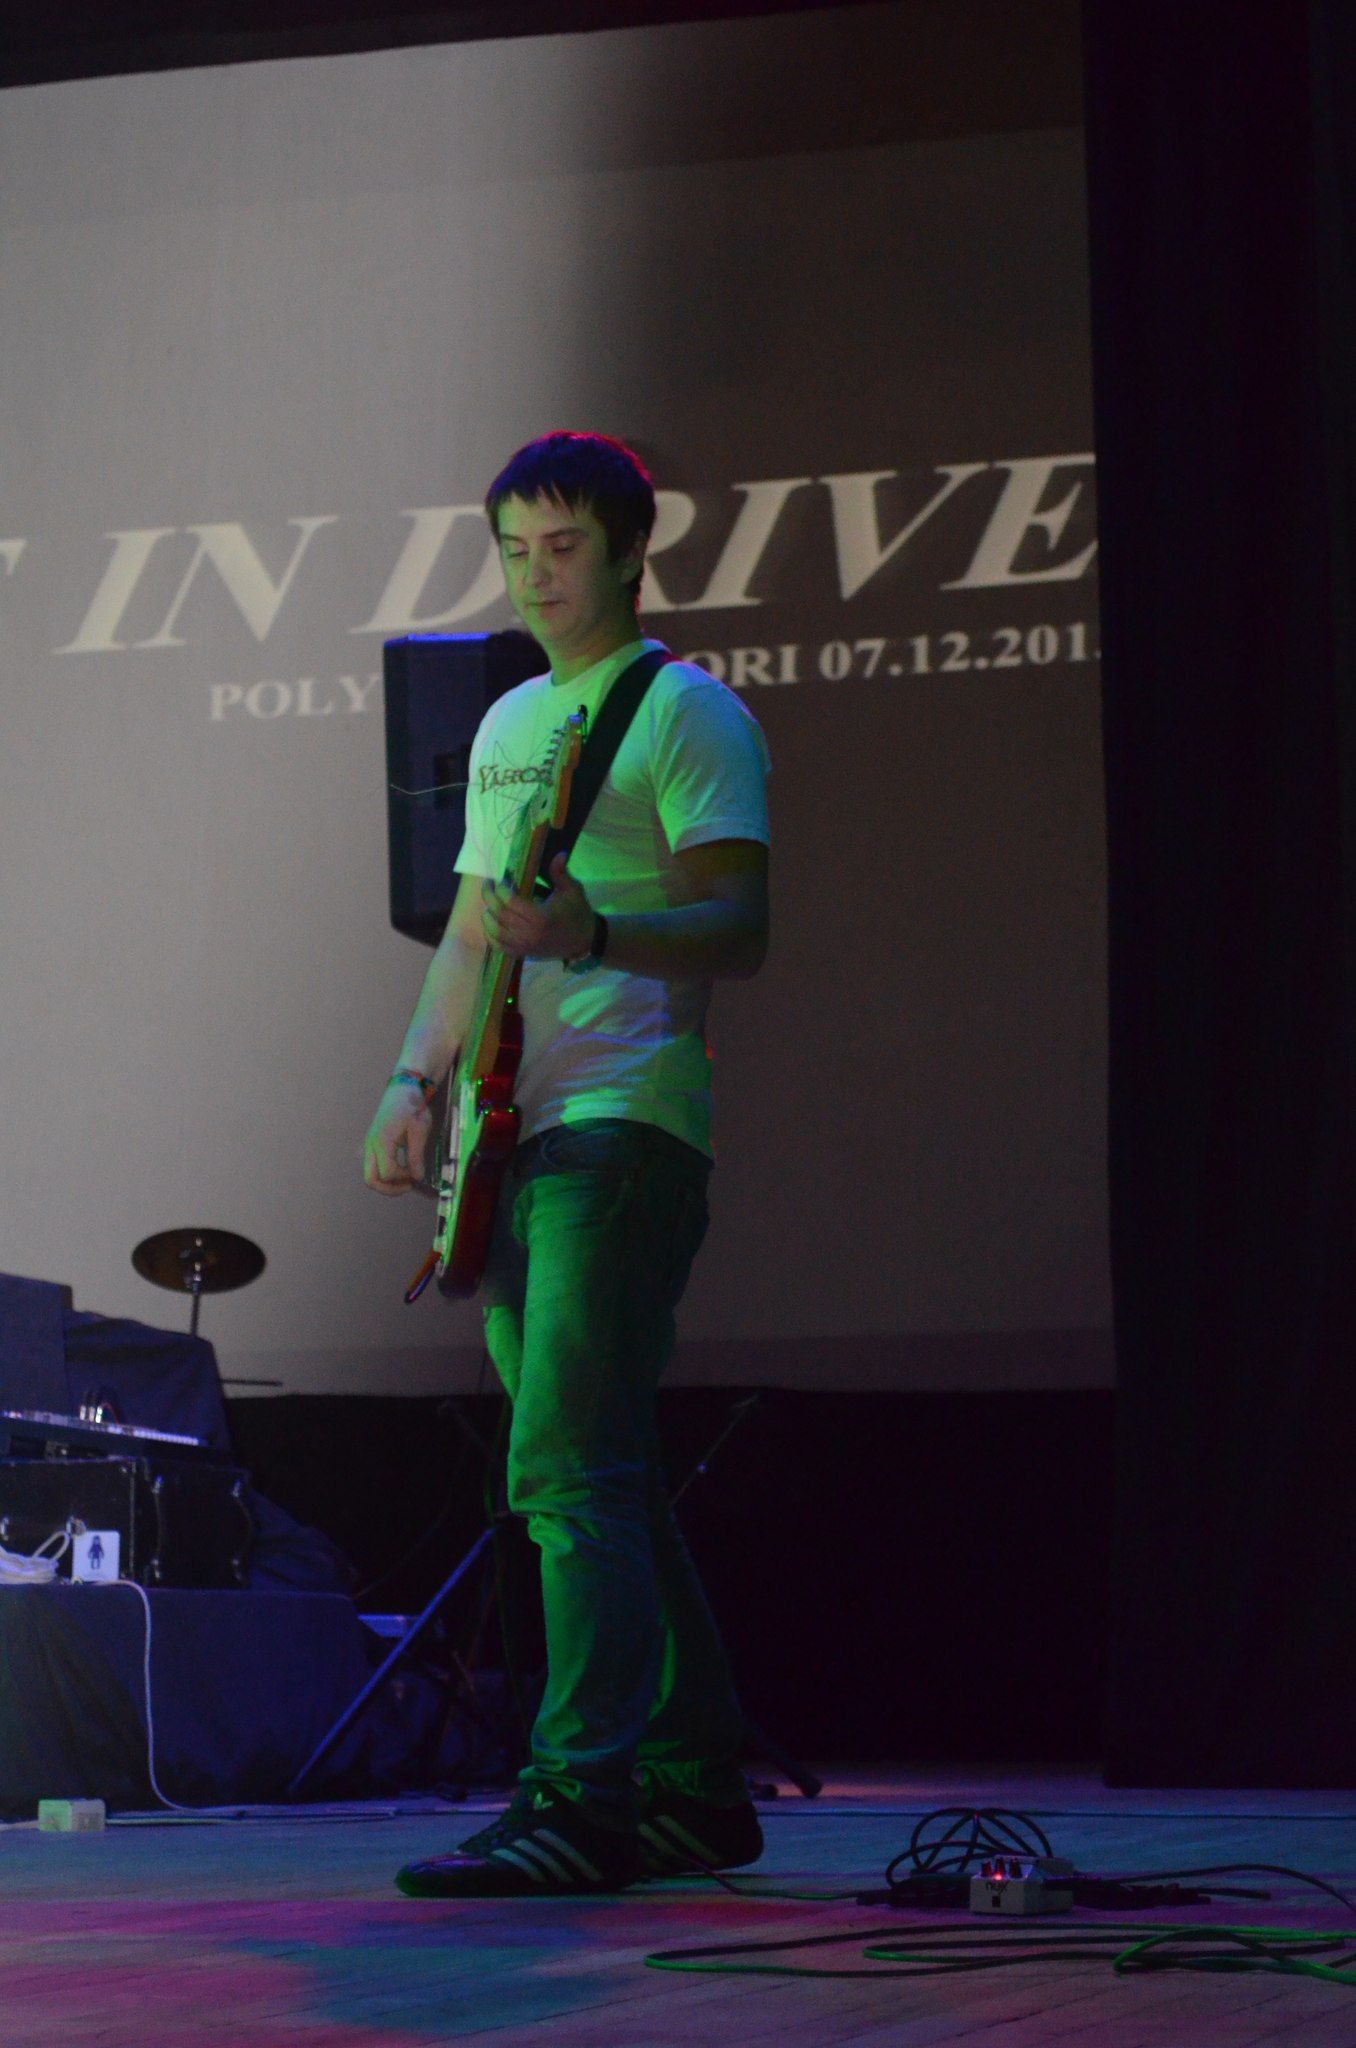 Live in Drive 2013 19